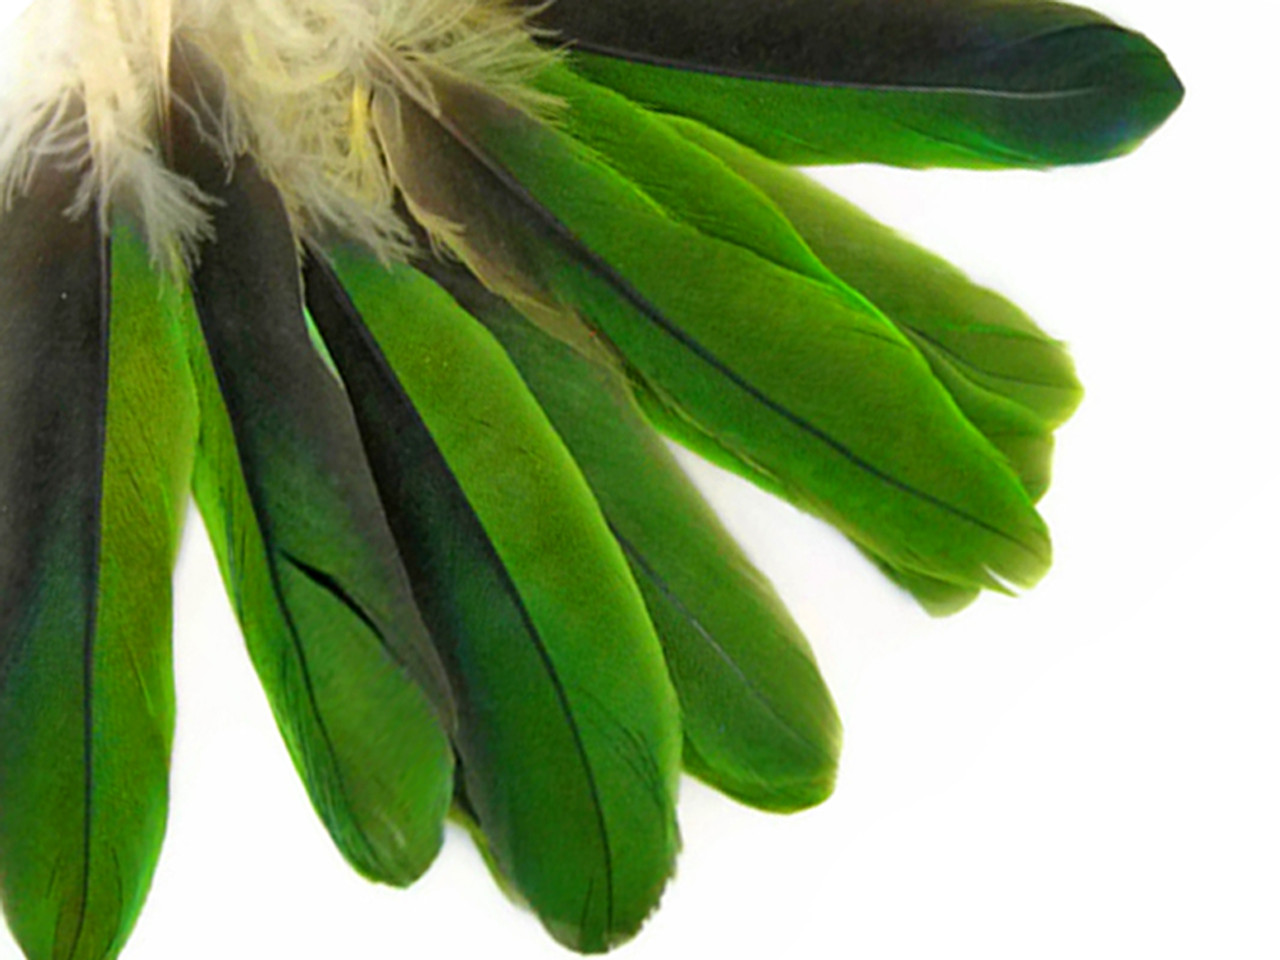 Rare Feathers, 6 Pieces Small Natural Green  Parrot Body Plumage  Feathers Ethically Sourced Cruelty Free : 2263 